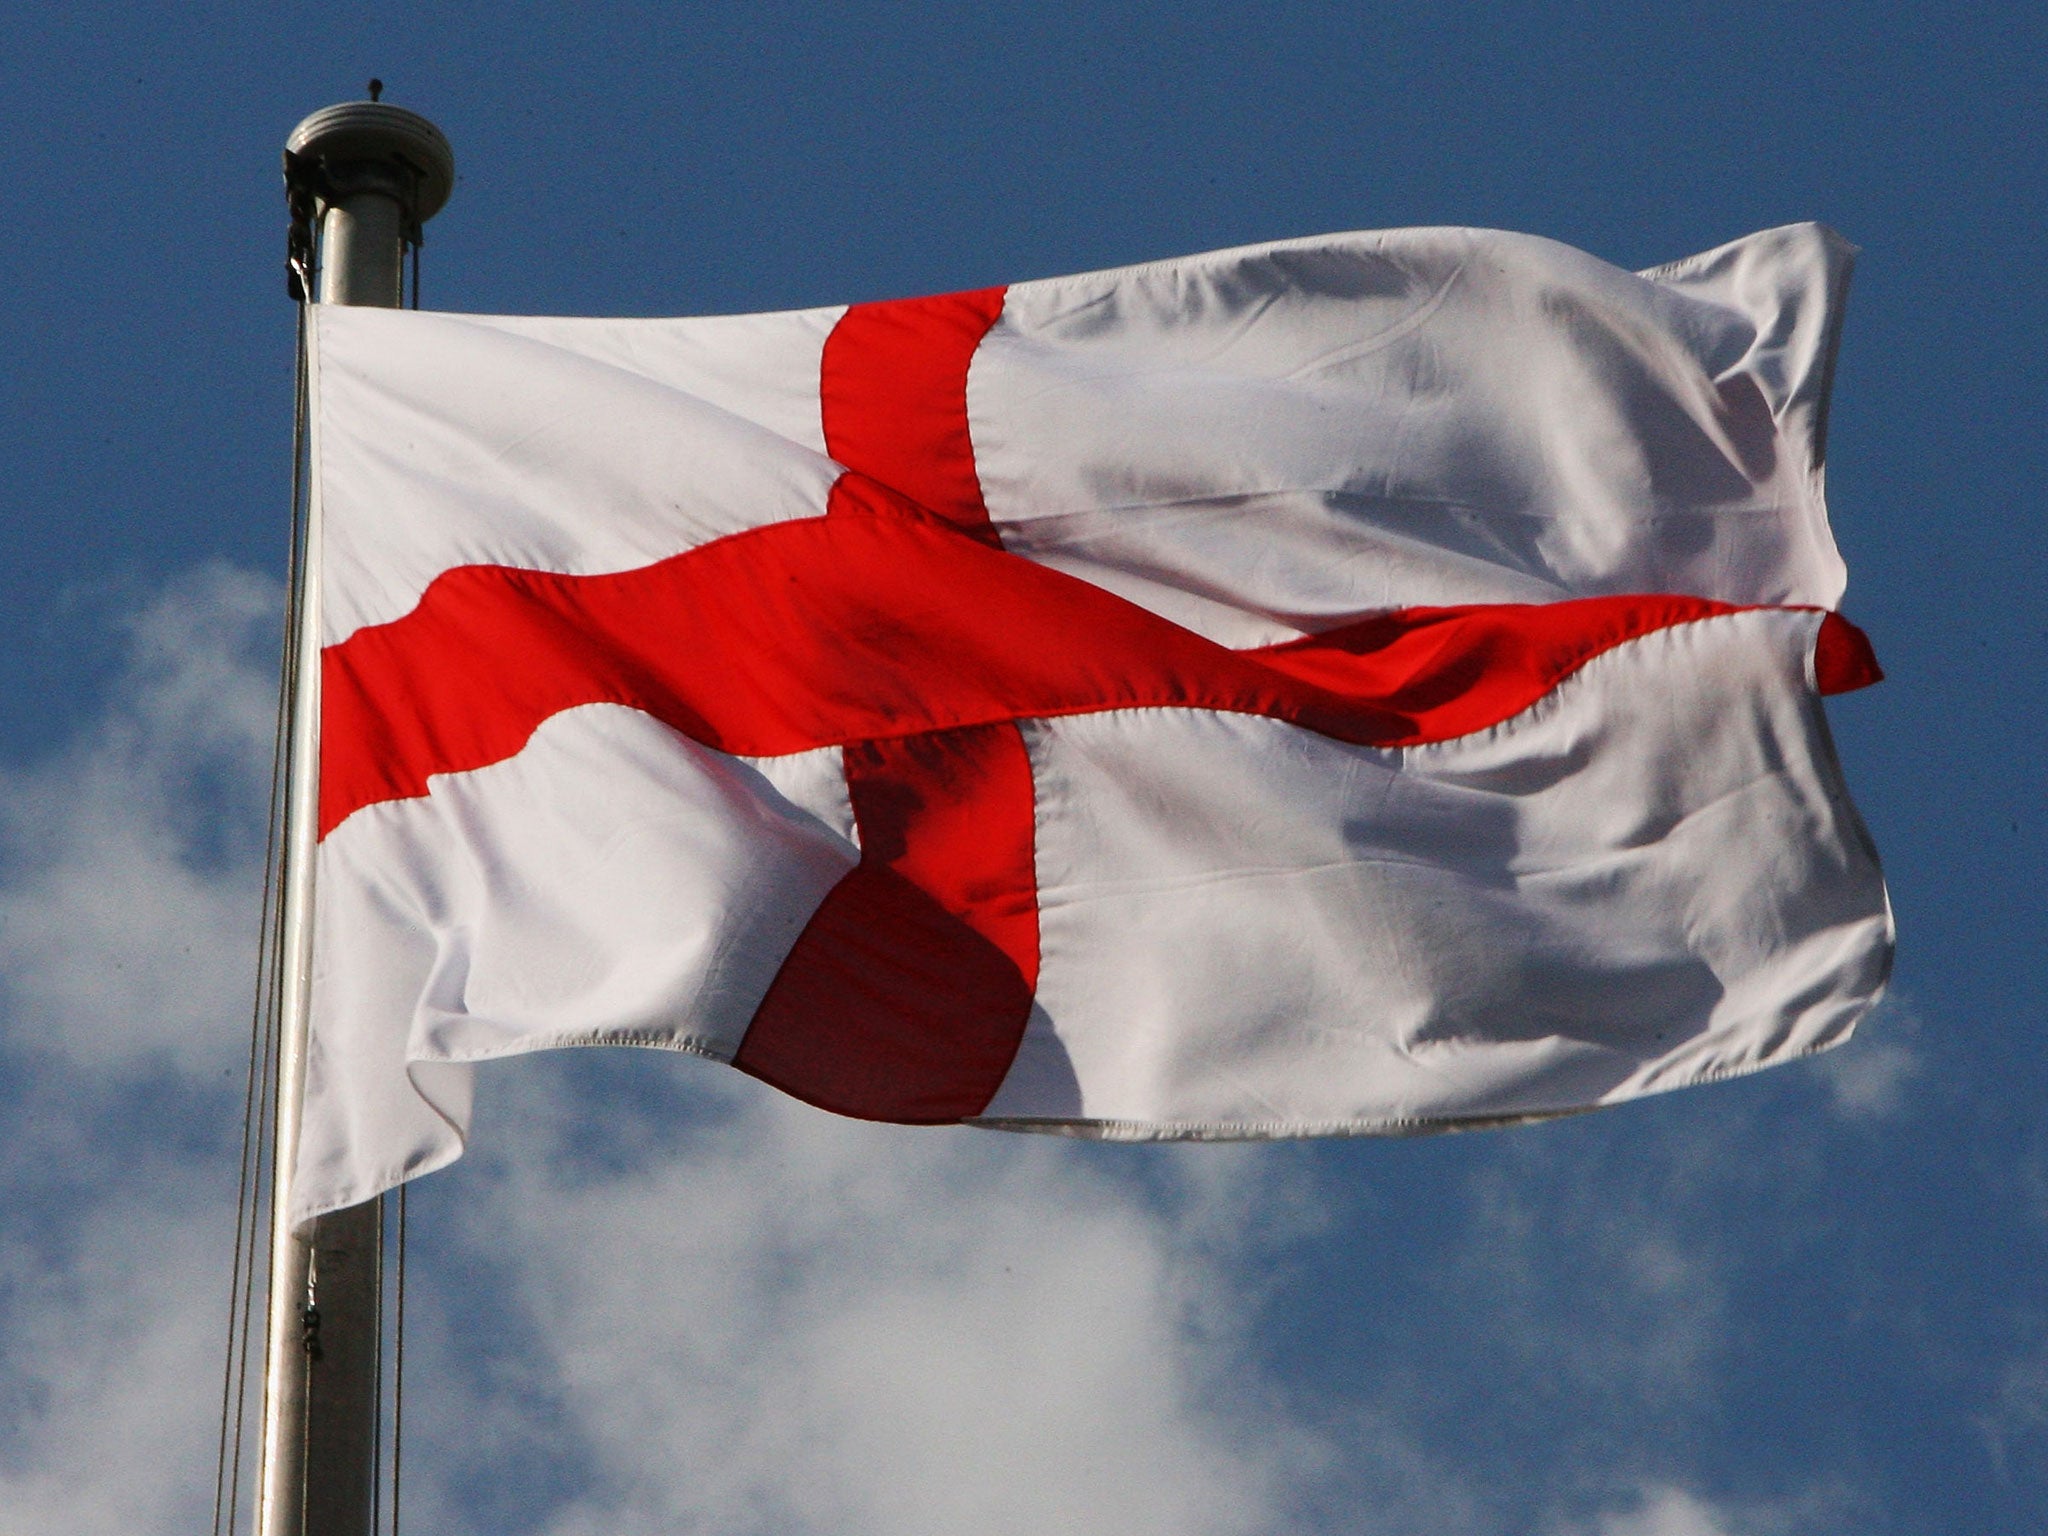 The Liberal Left should stop feeling guilty about flying the flag of St George and have no qualms about celebrating Englishness, one of Ed Miliband’s closest advisers said